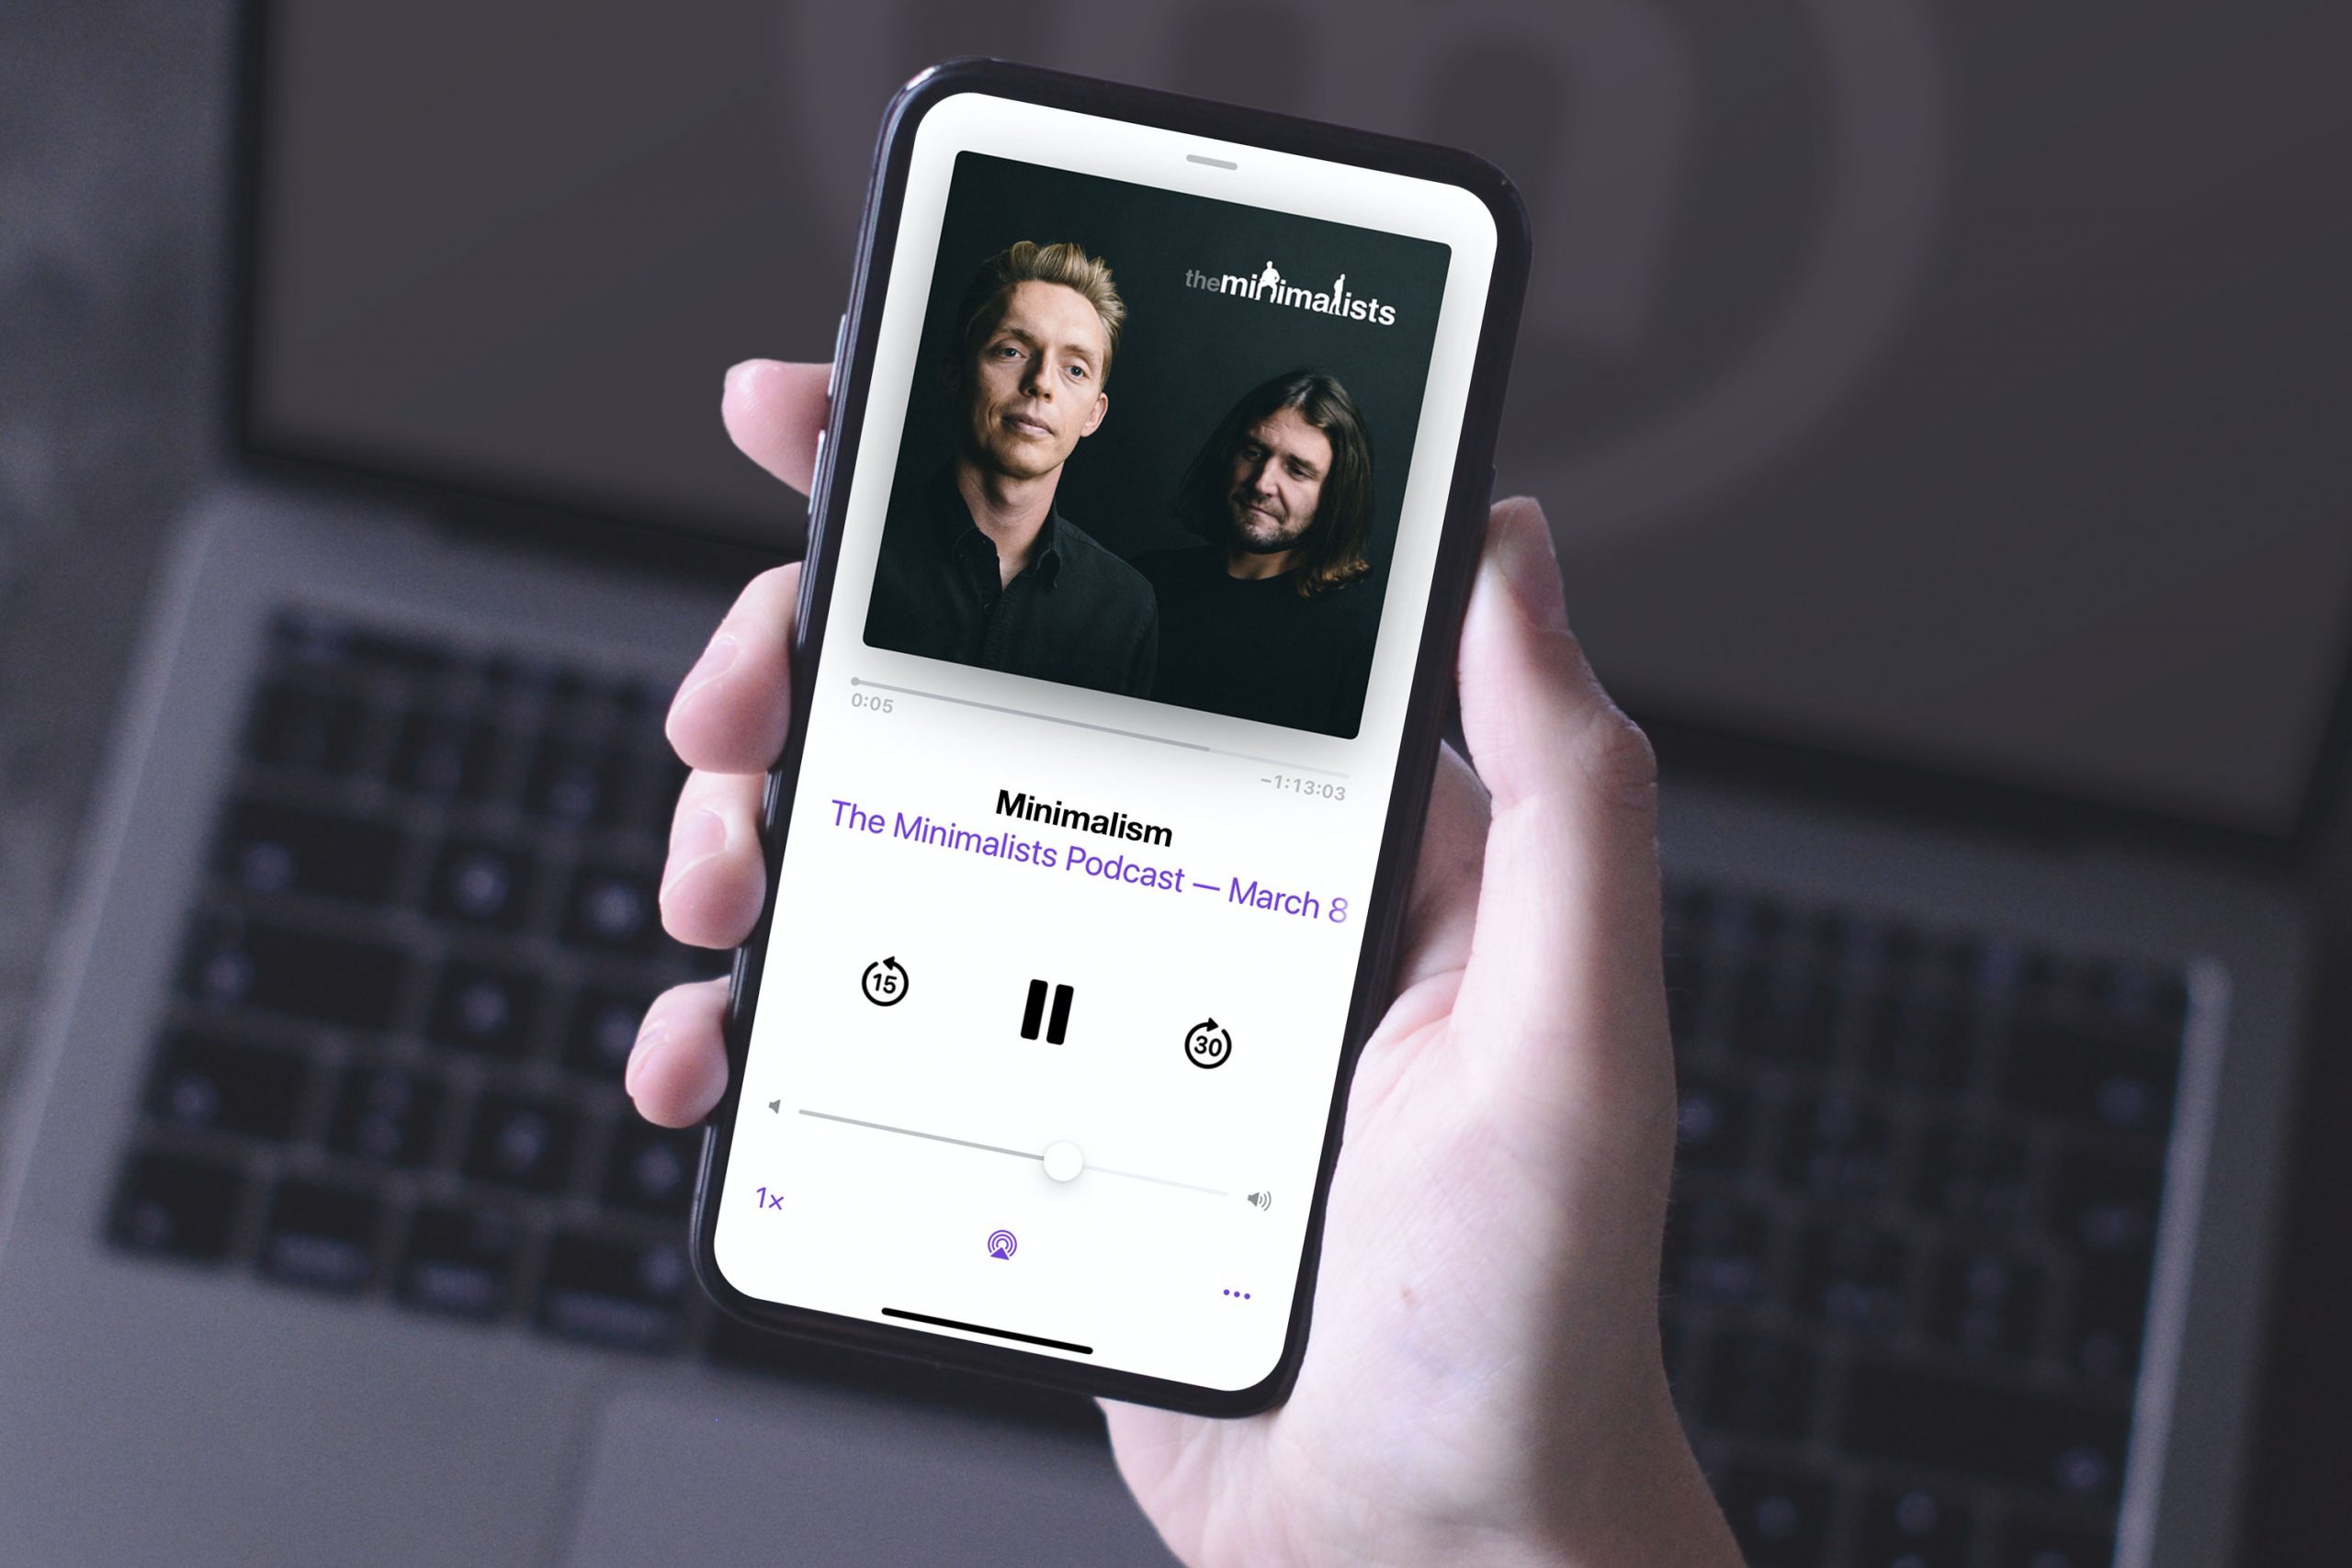 The Minimalists Podcast pic